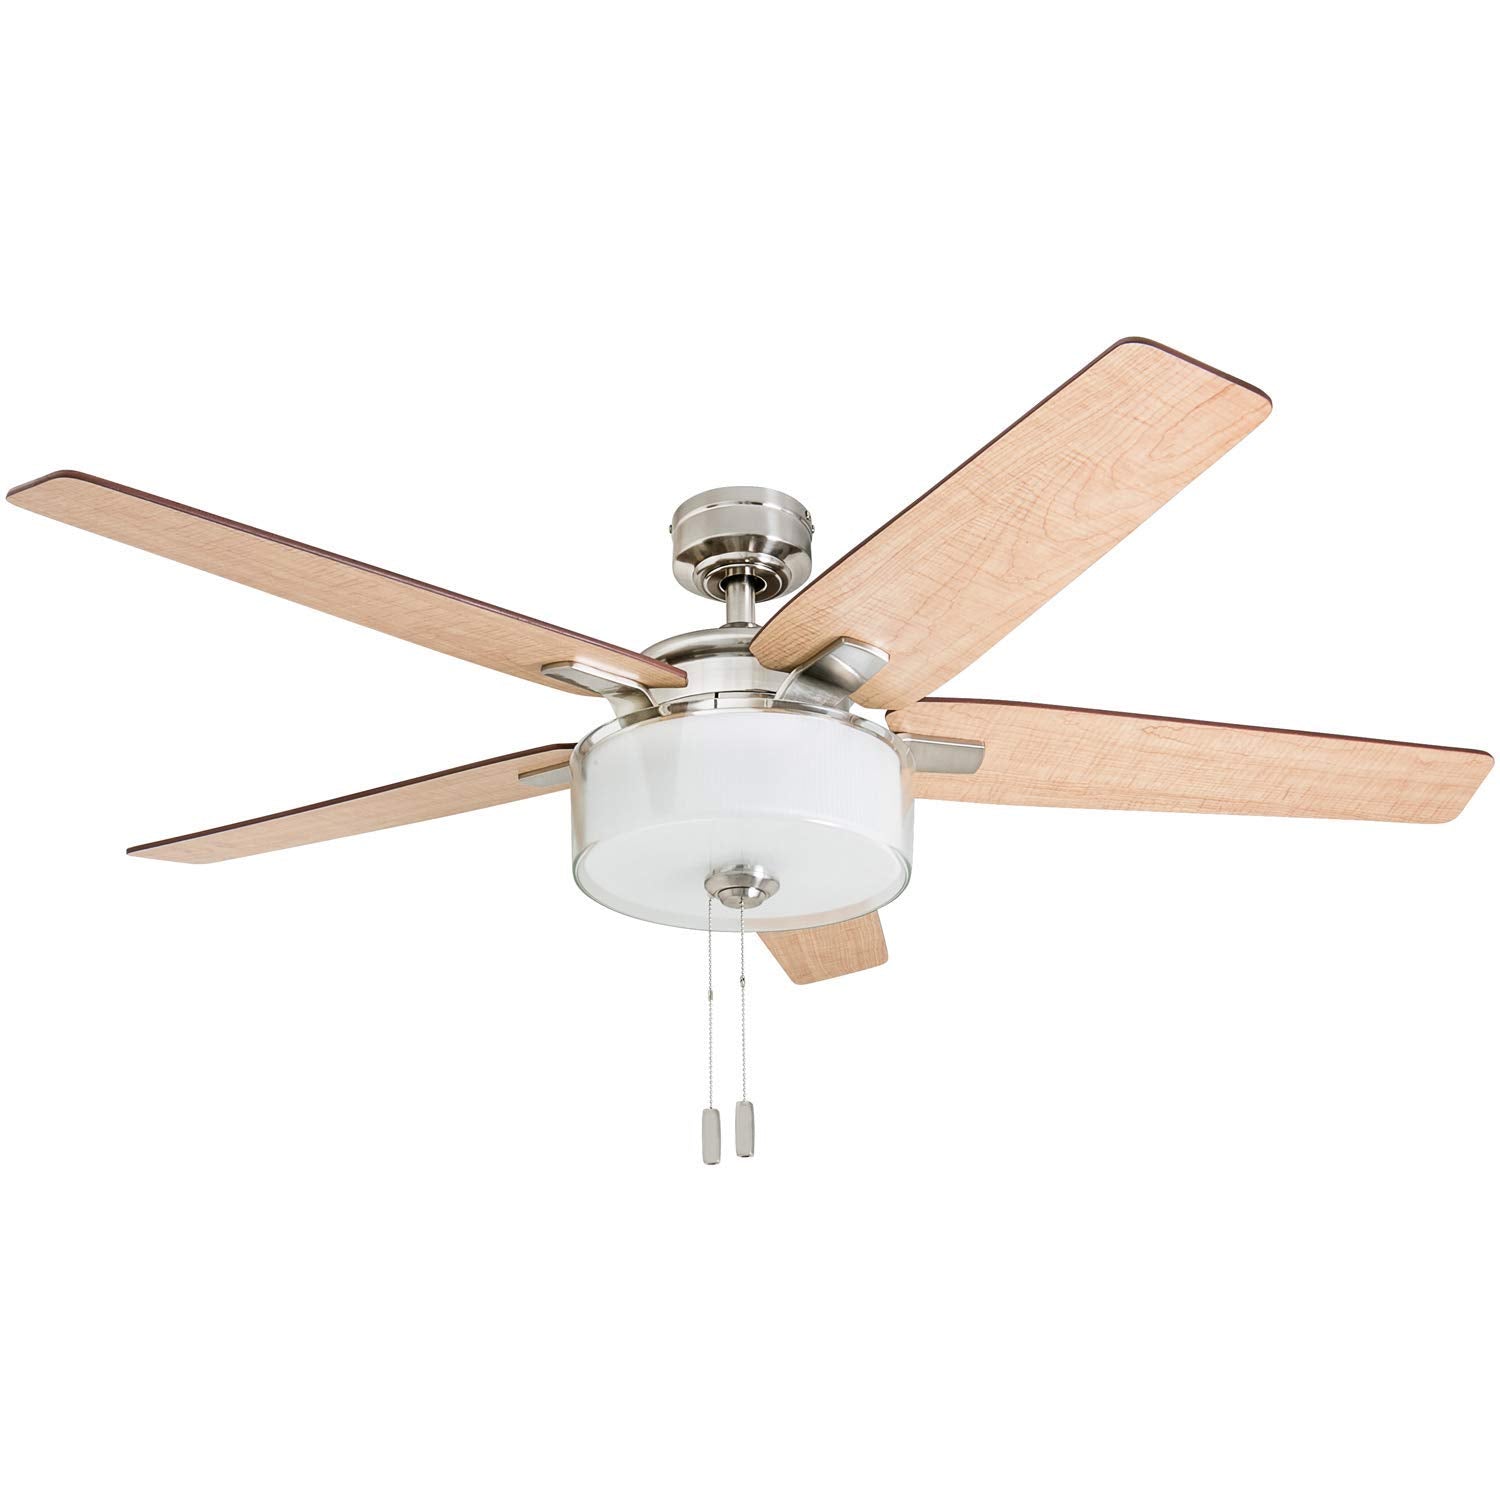 52 Inch Cicero, Brushed Nickel, Pull Chain, Ceiling Fan by Prominence Home